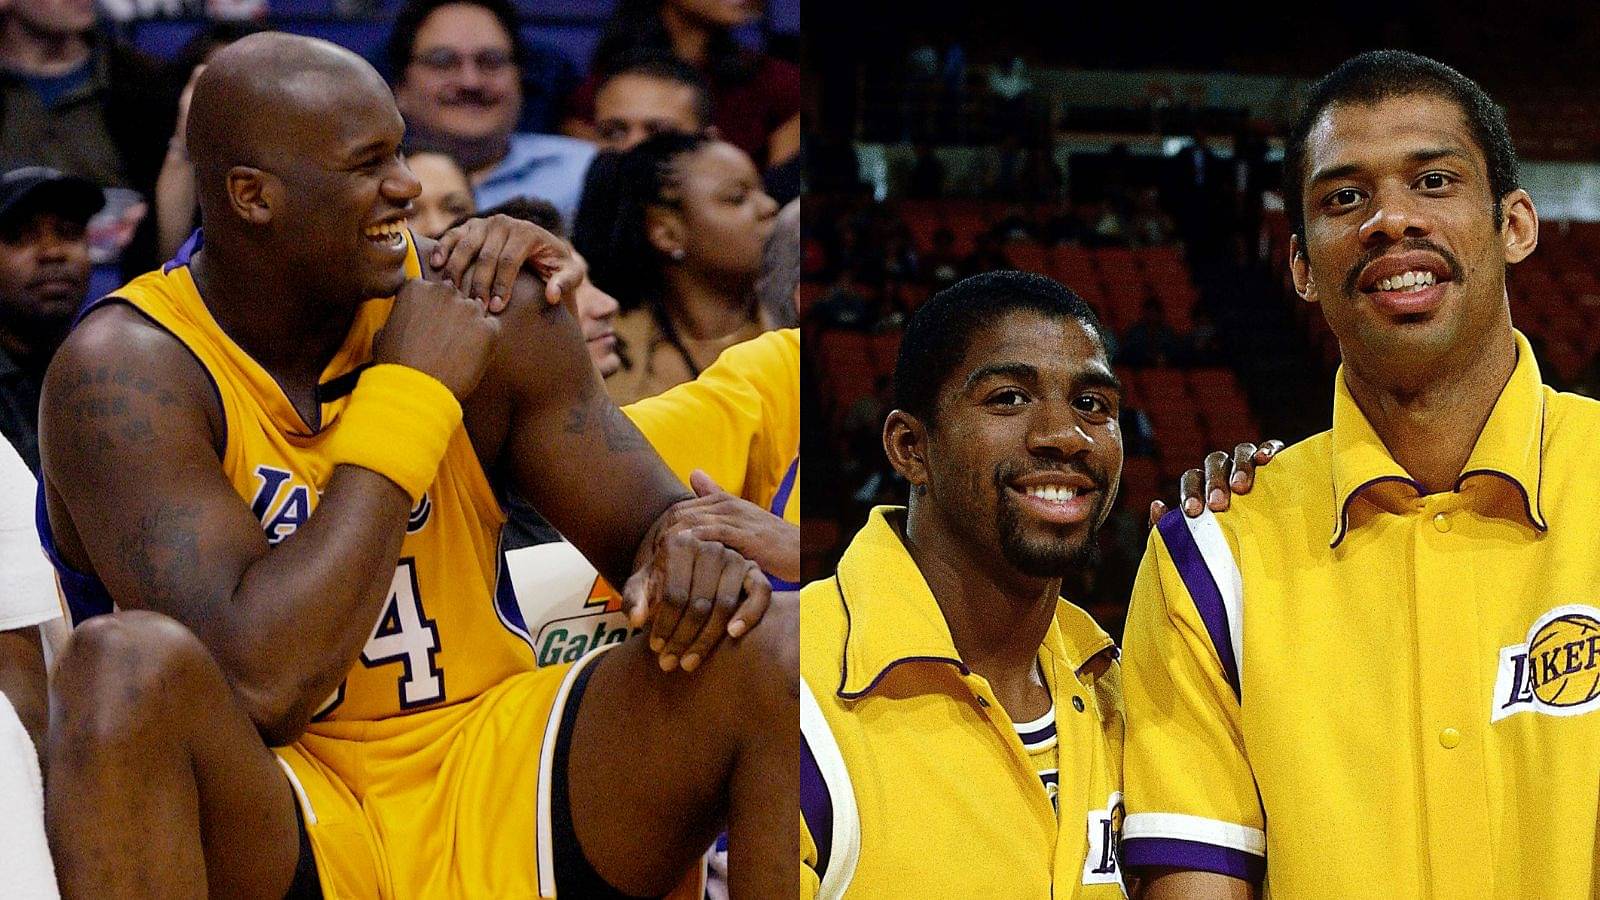 “Hey Dummy, how many rings would Magic Johnson have without Kareem Abdul-Jabbar?”: Shaquille O'Neal destroys a critique on Twitter who suggested he wouldn’t rings without Kobe Bryant